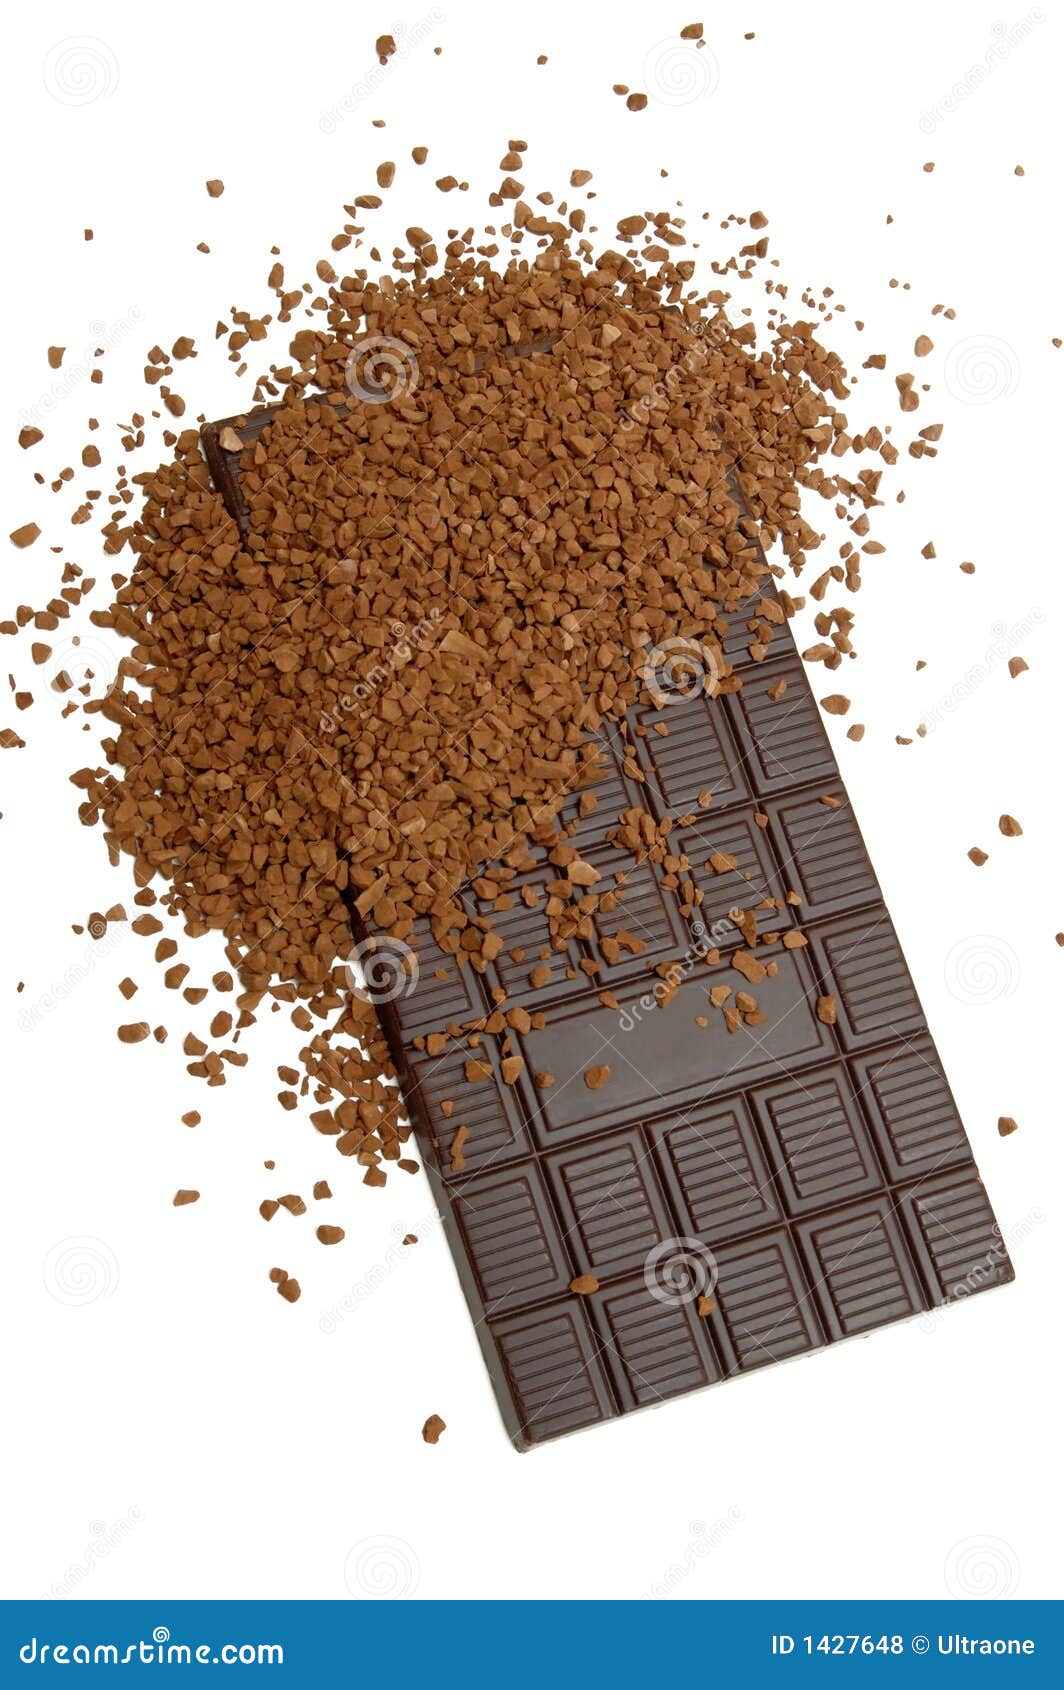 chocolate and coffee granules